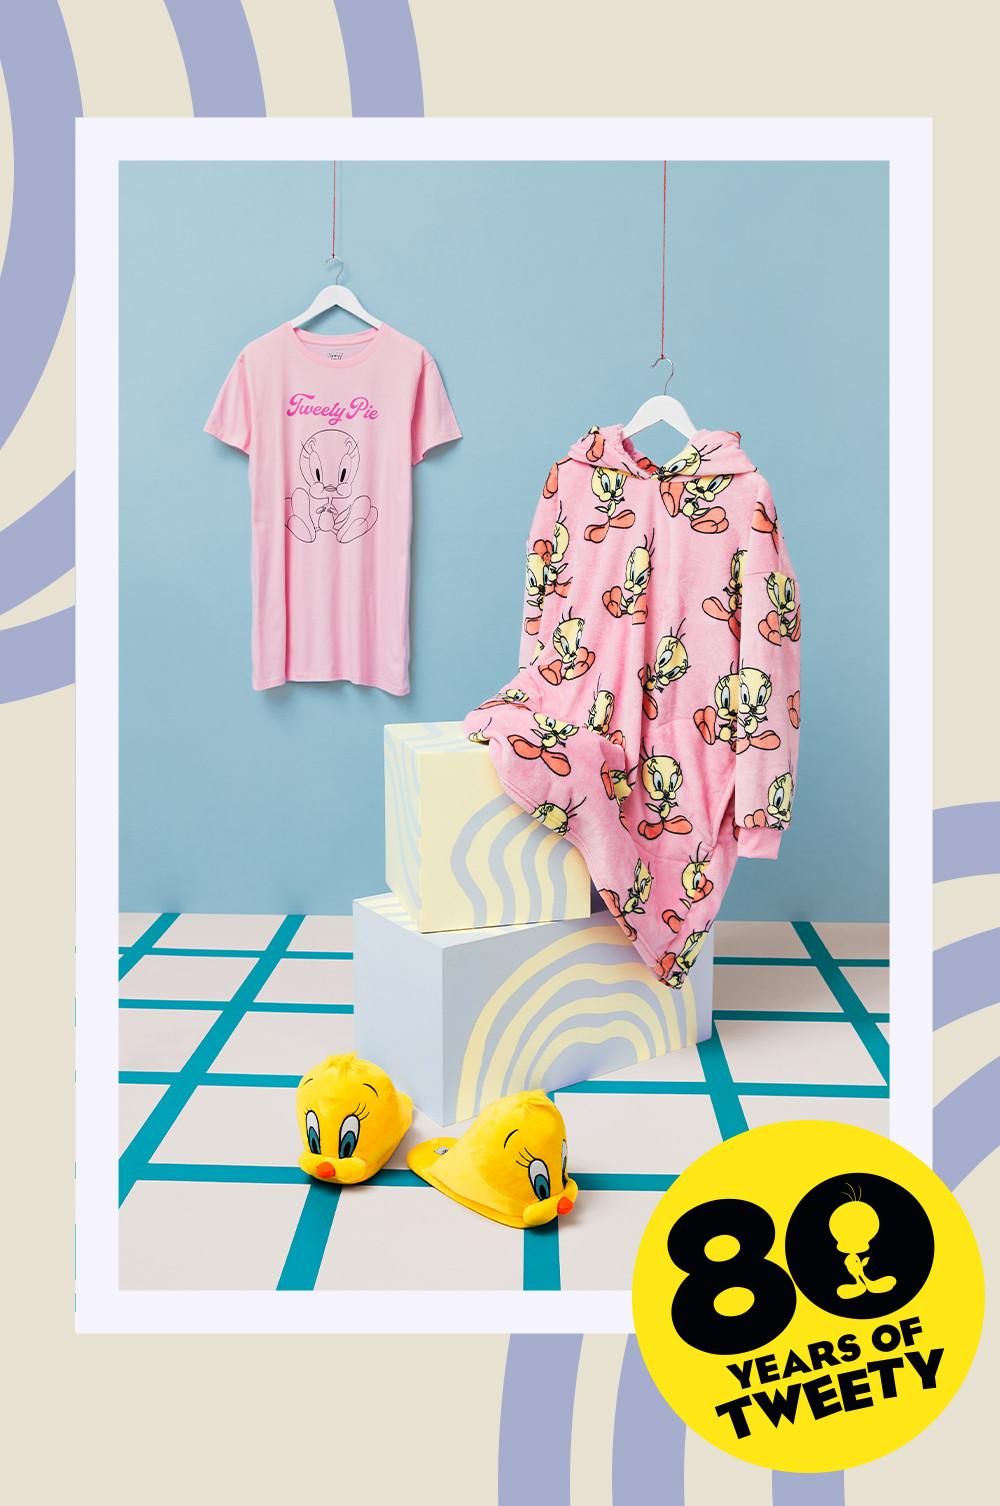 Images of Tweety pajamas and slippers